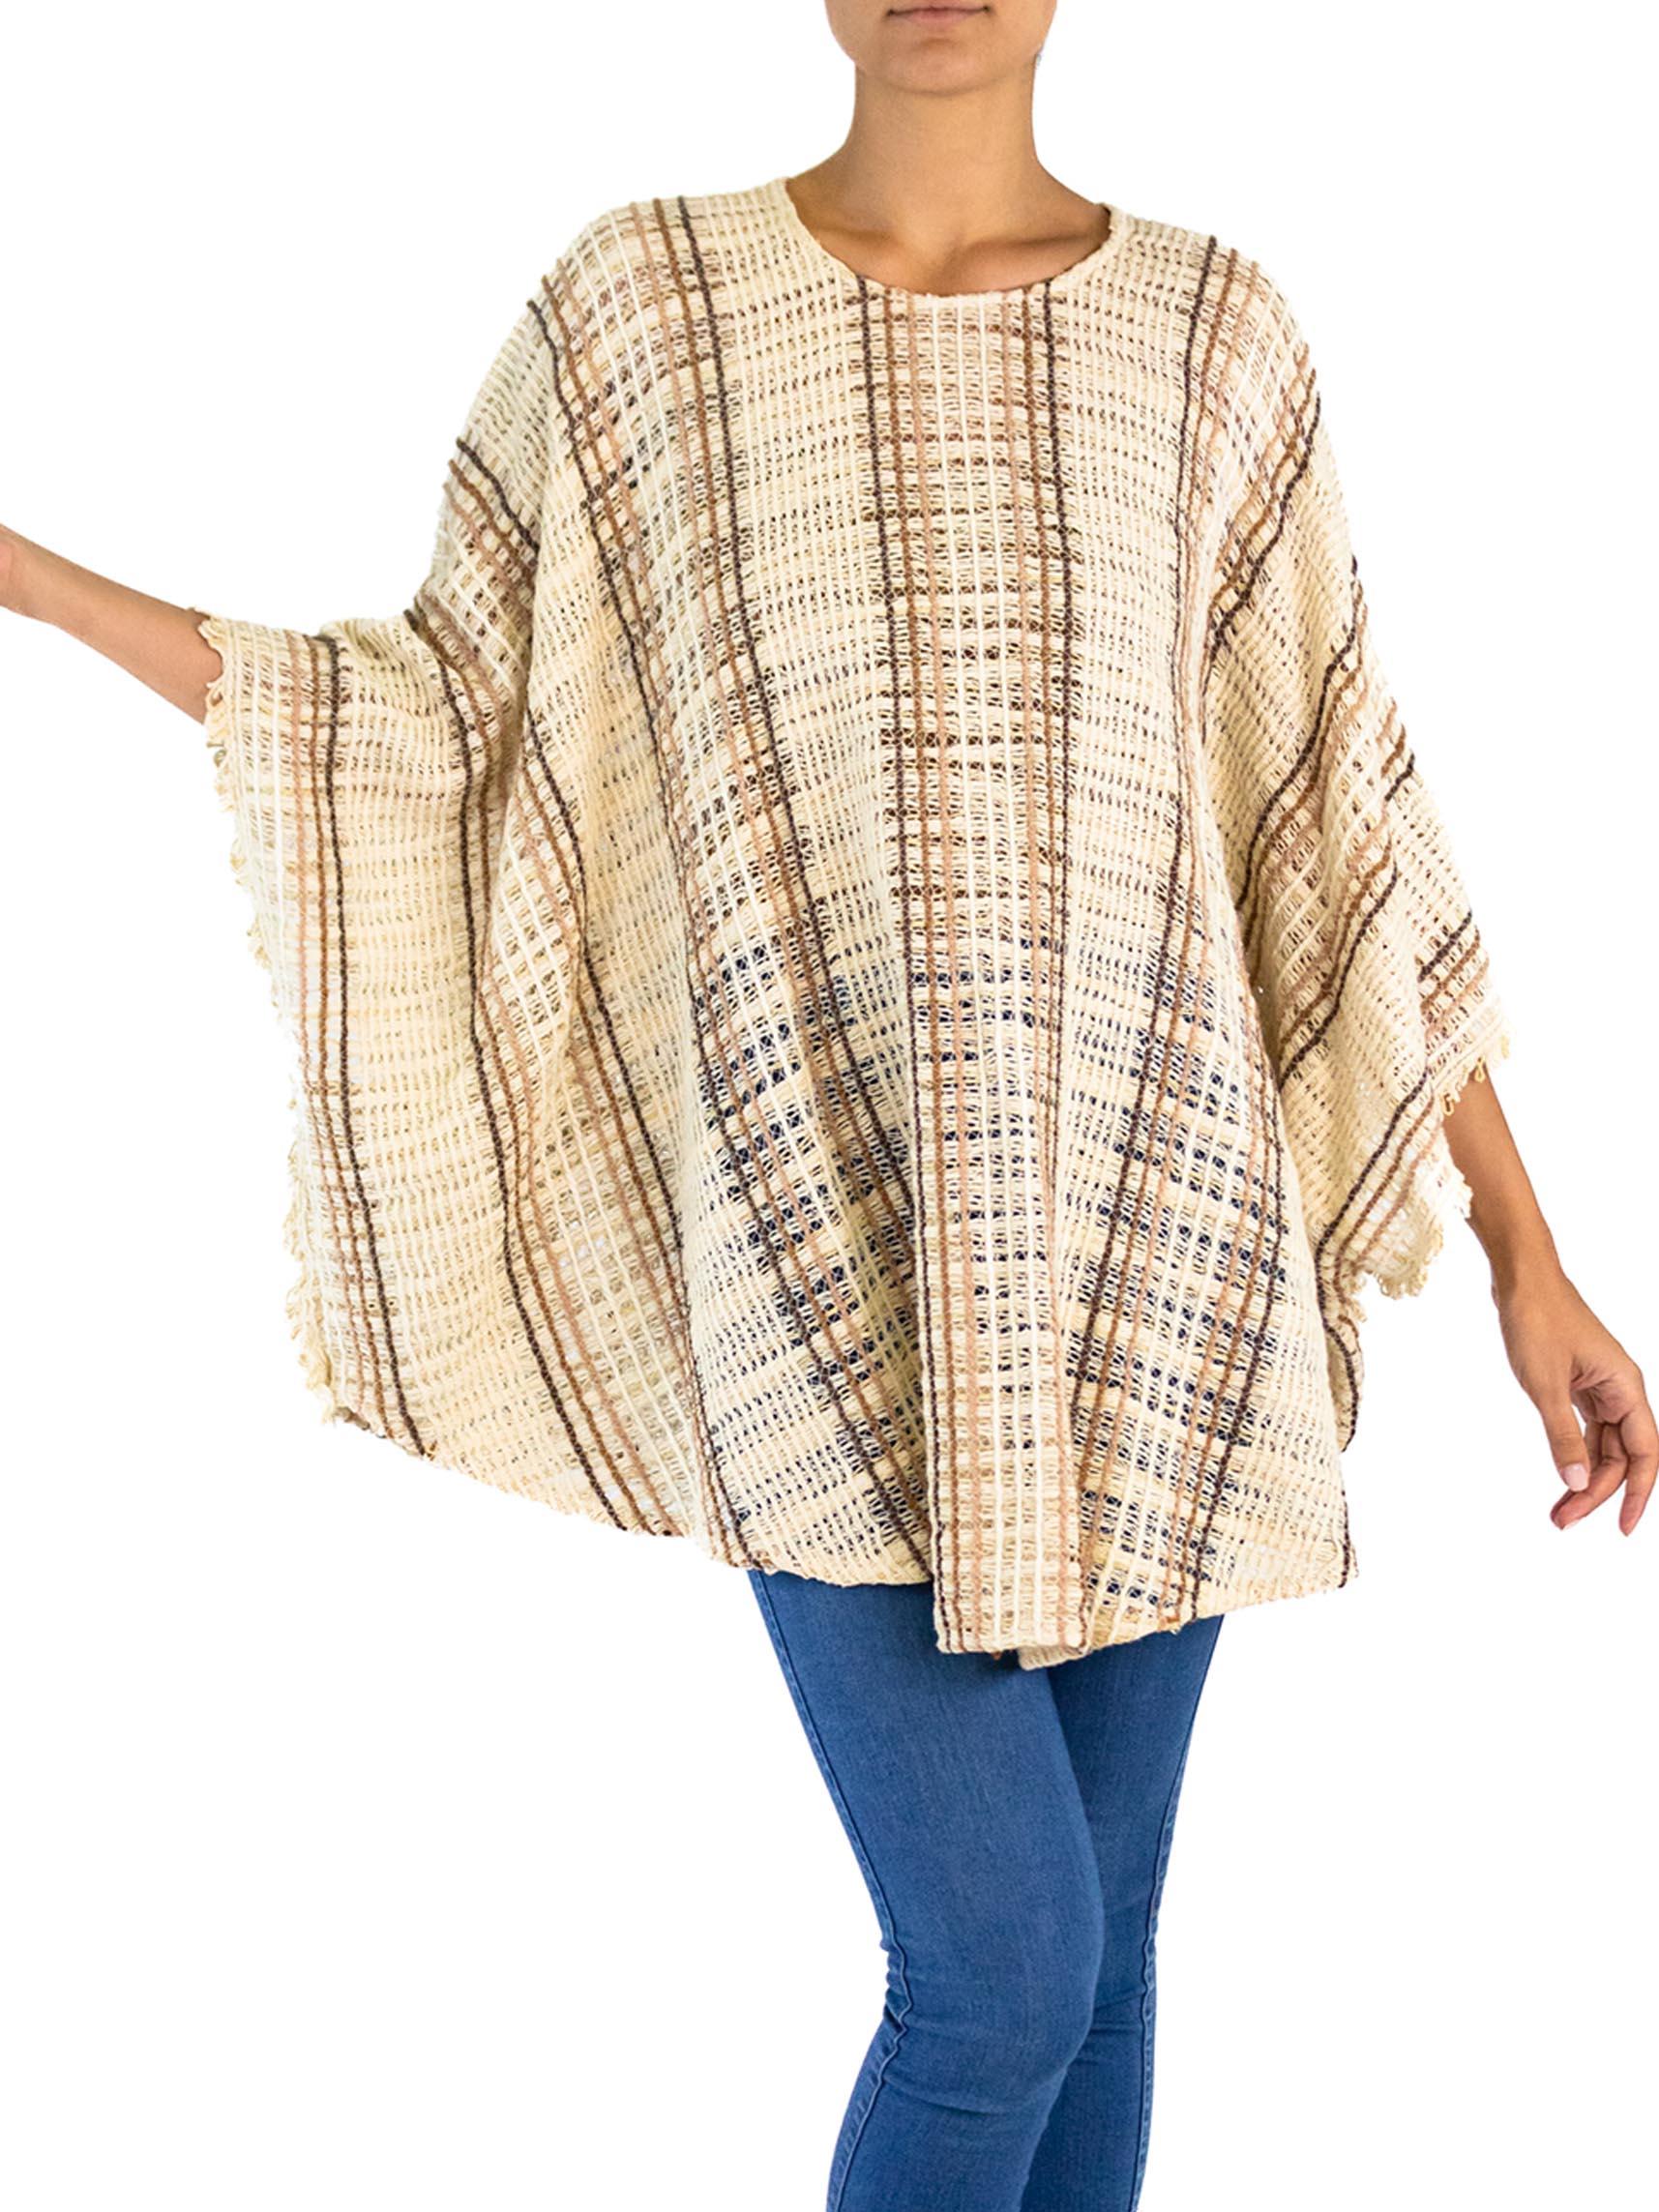 1970S Brown & Cream Cotton Blend Open Weave Tunic Top For Sale 5